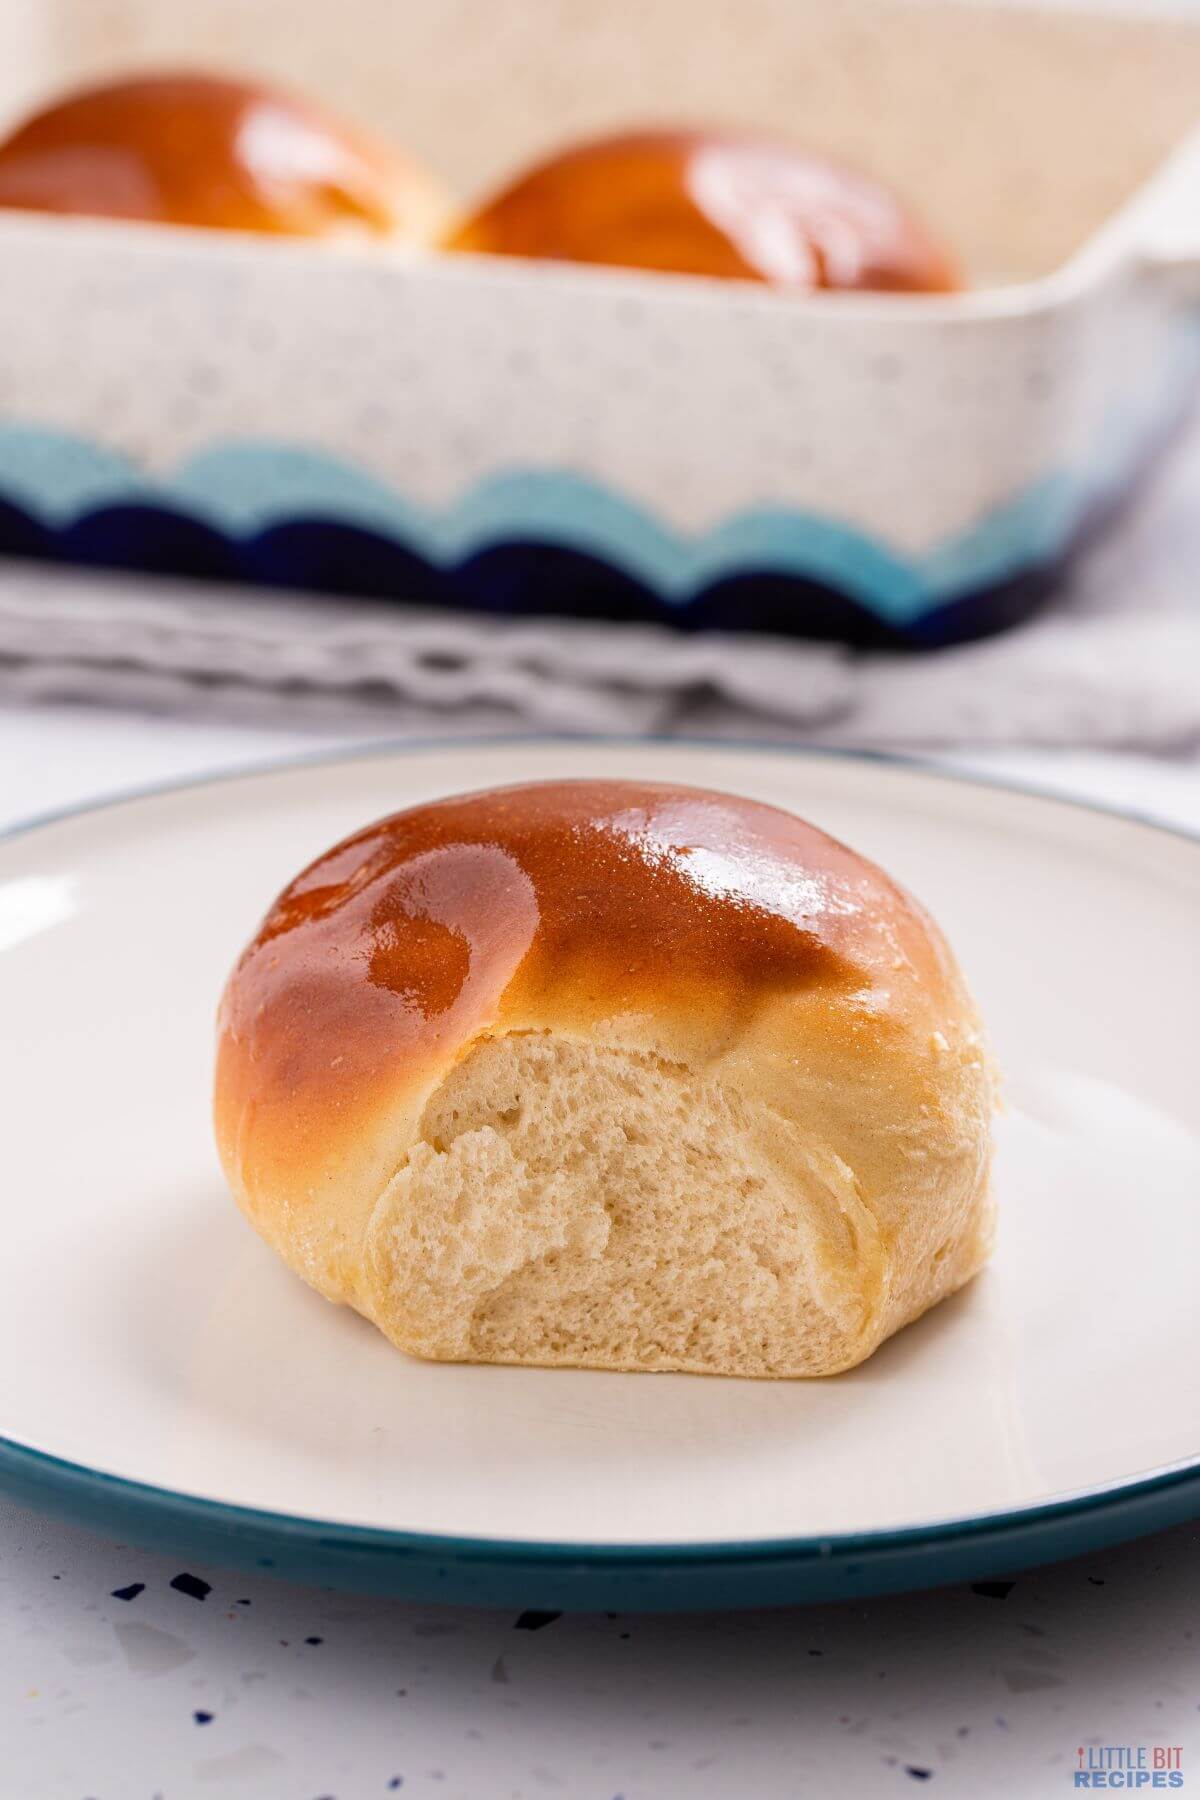 yeast roll on white plate.